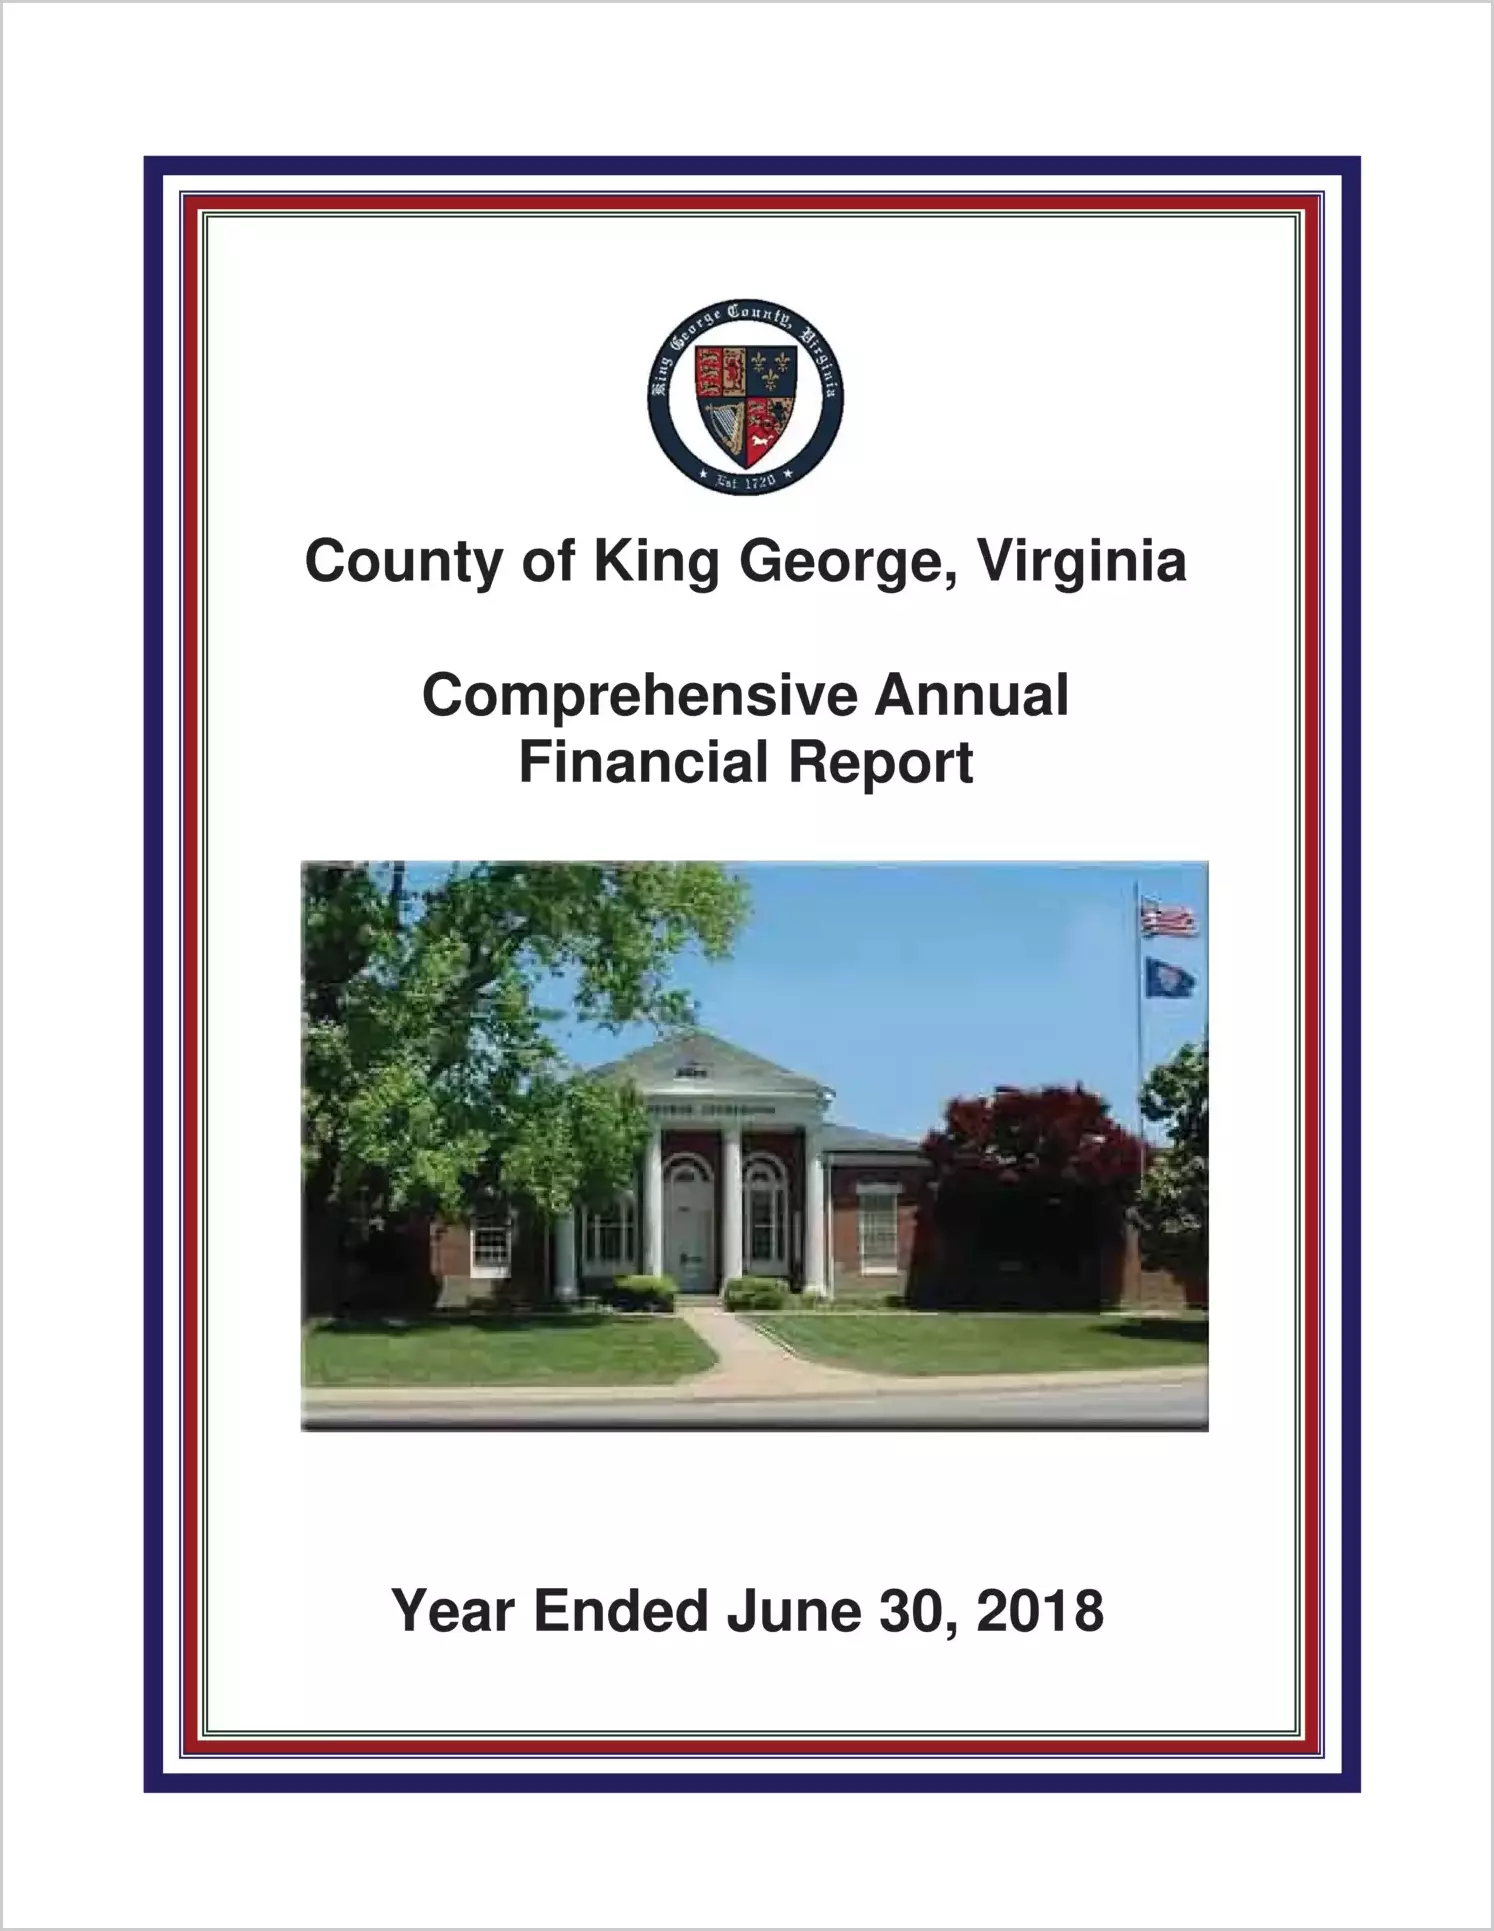 2018 Annual Financial Report for County of King George